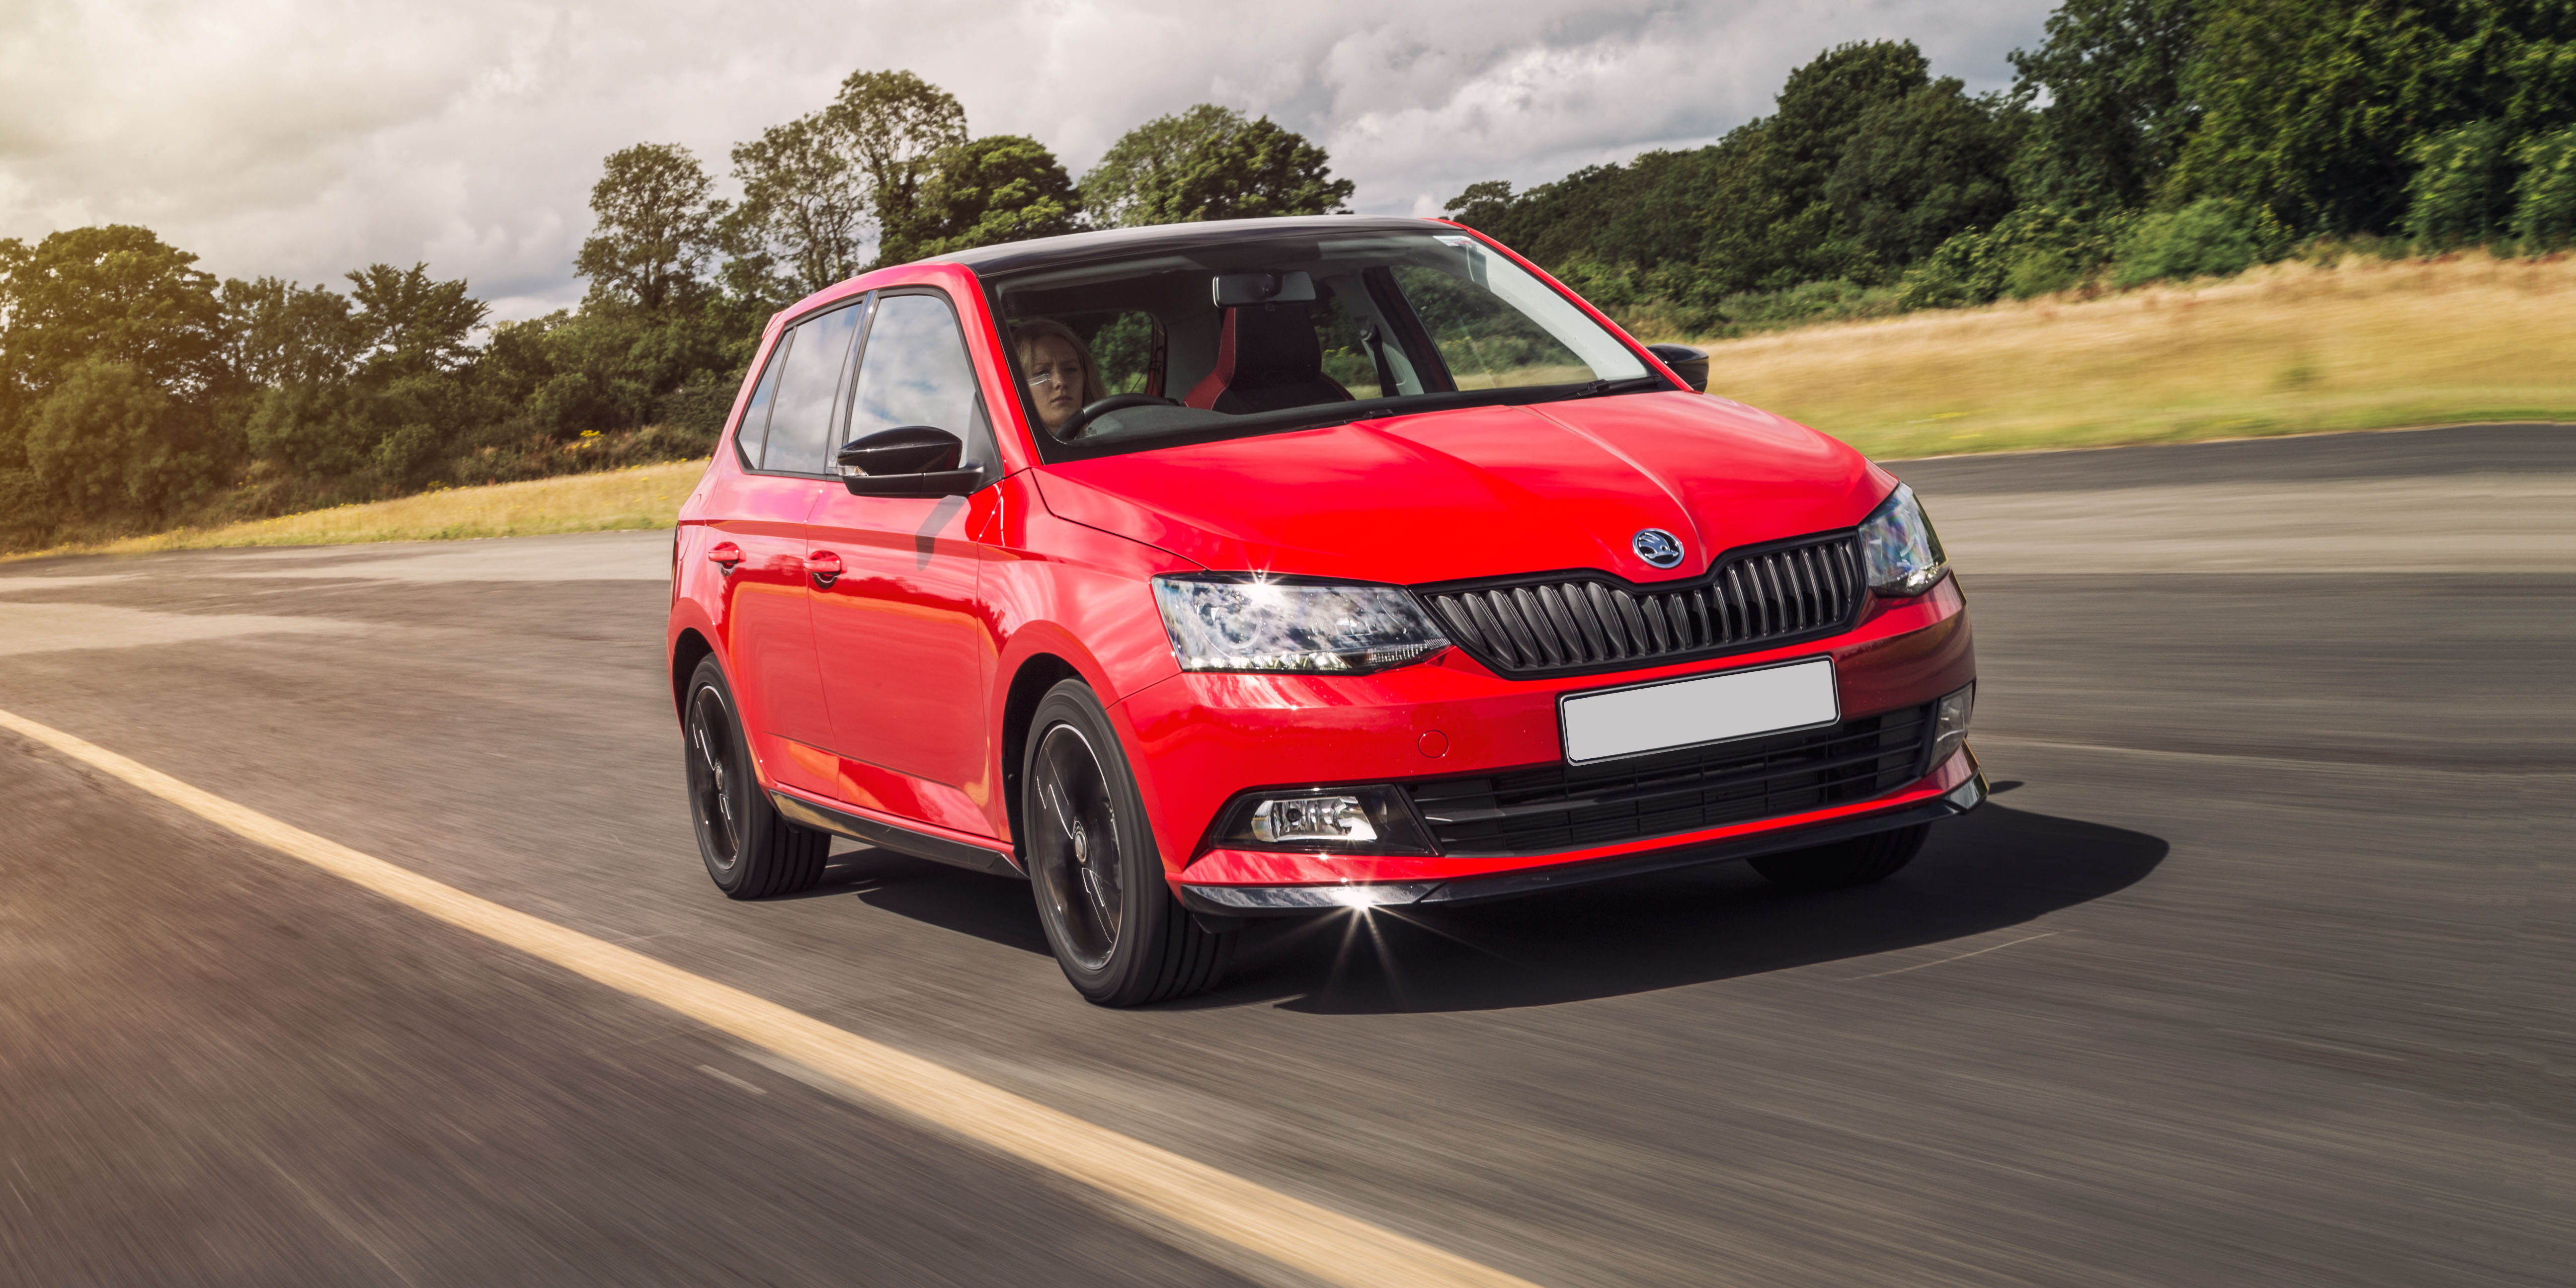 Skoda Fabia II technical specifications and fuel consumption —